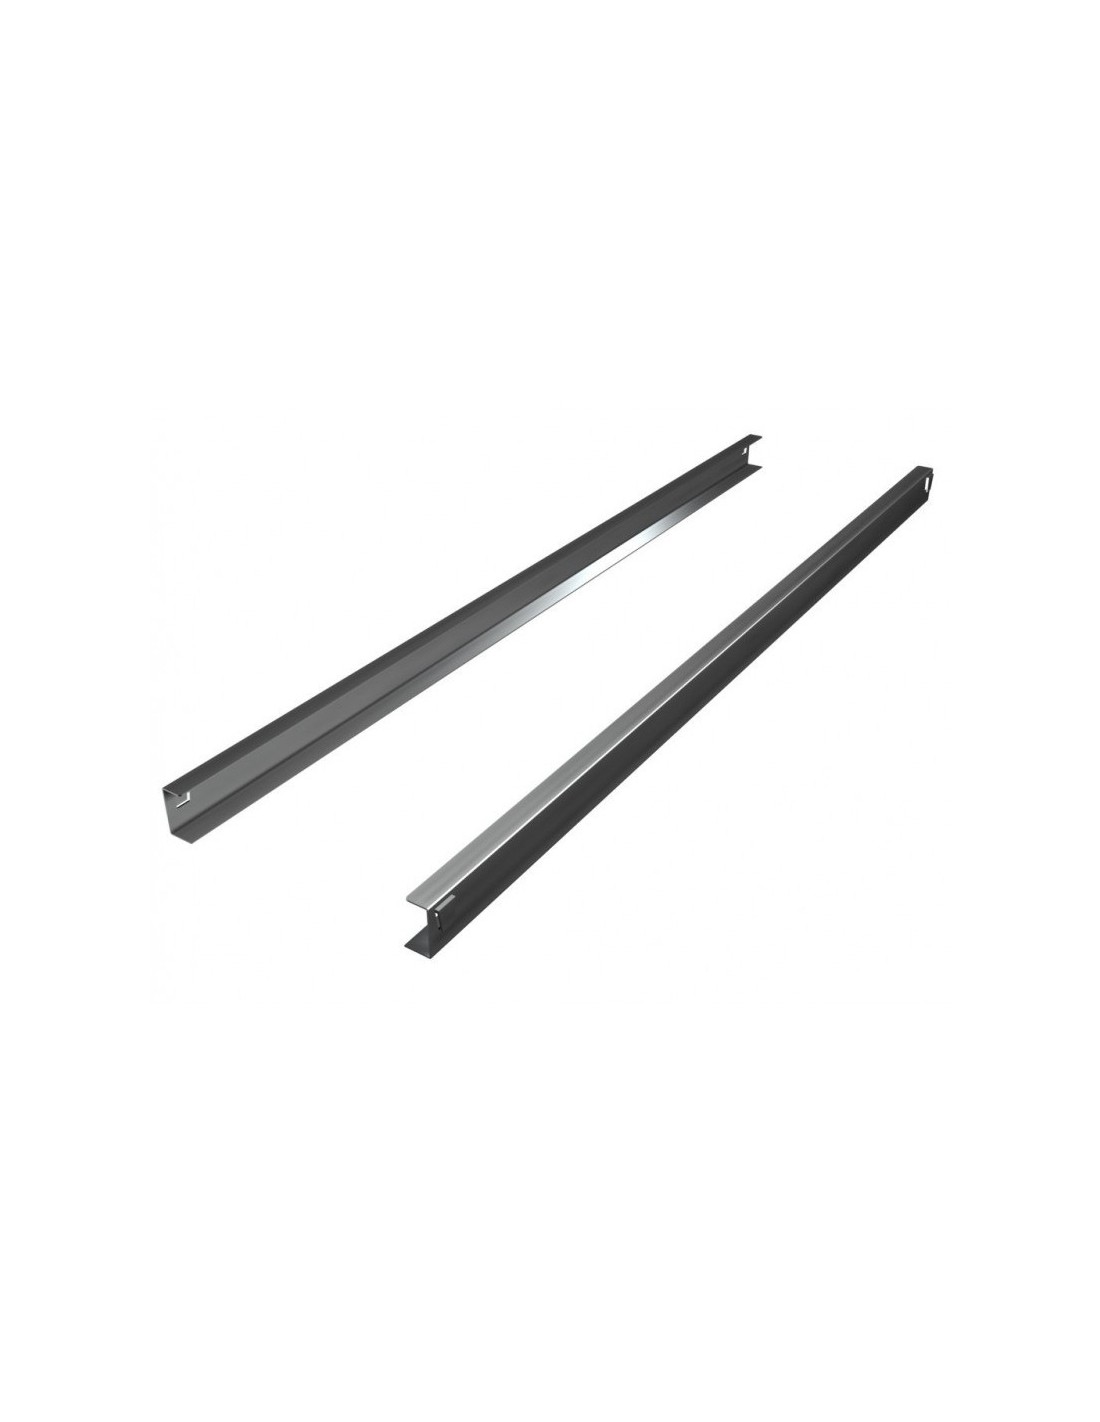 Pair of anti-overturning guides for grille